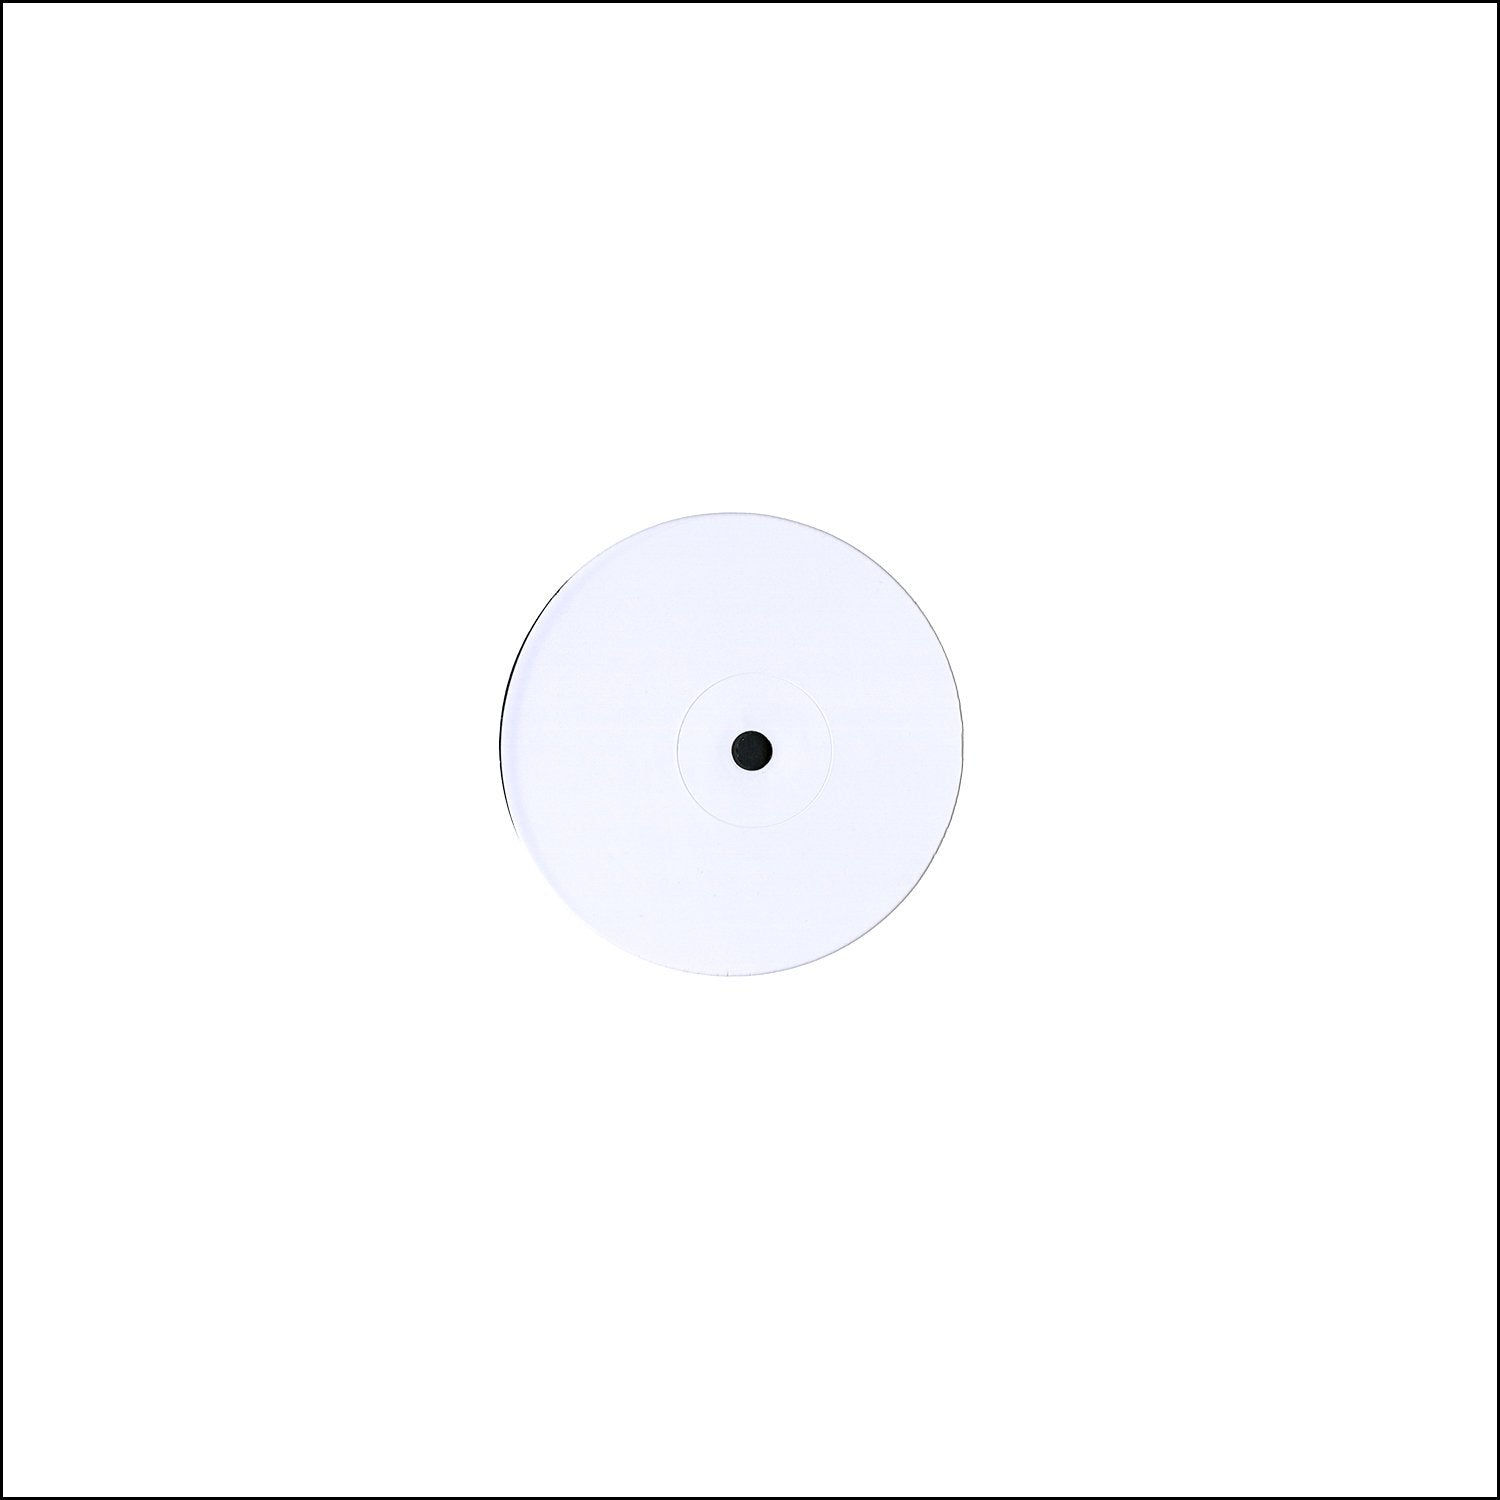 All Hopped Up [Test Pressing]